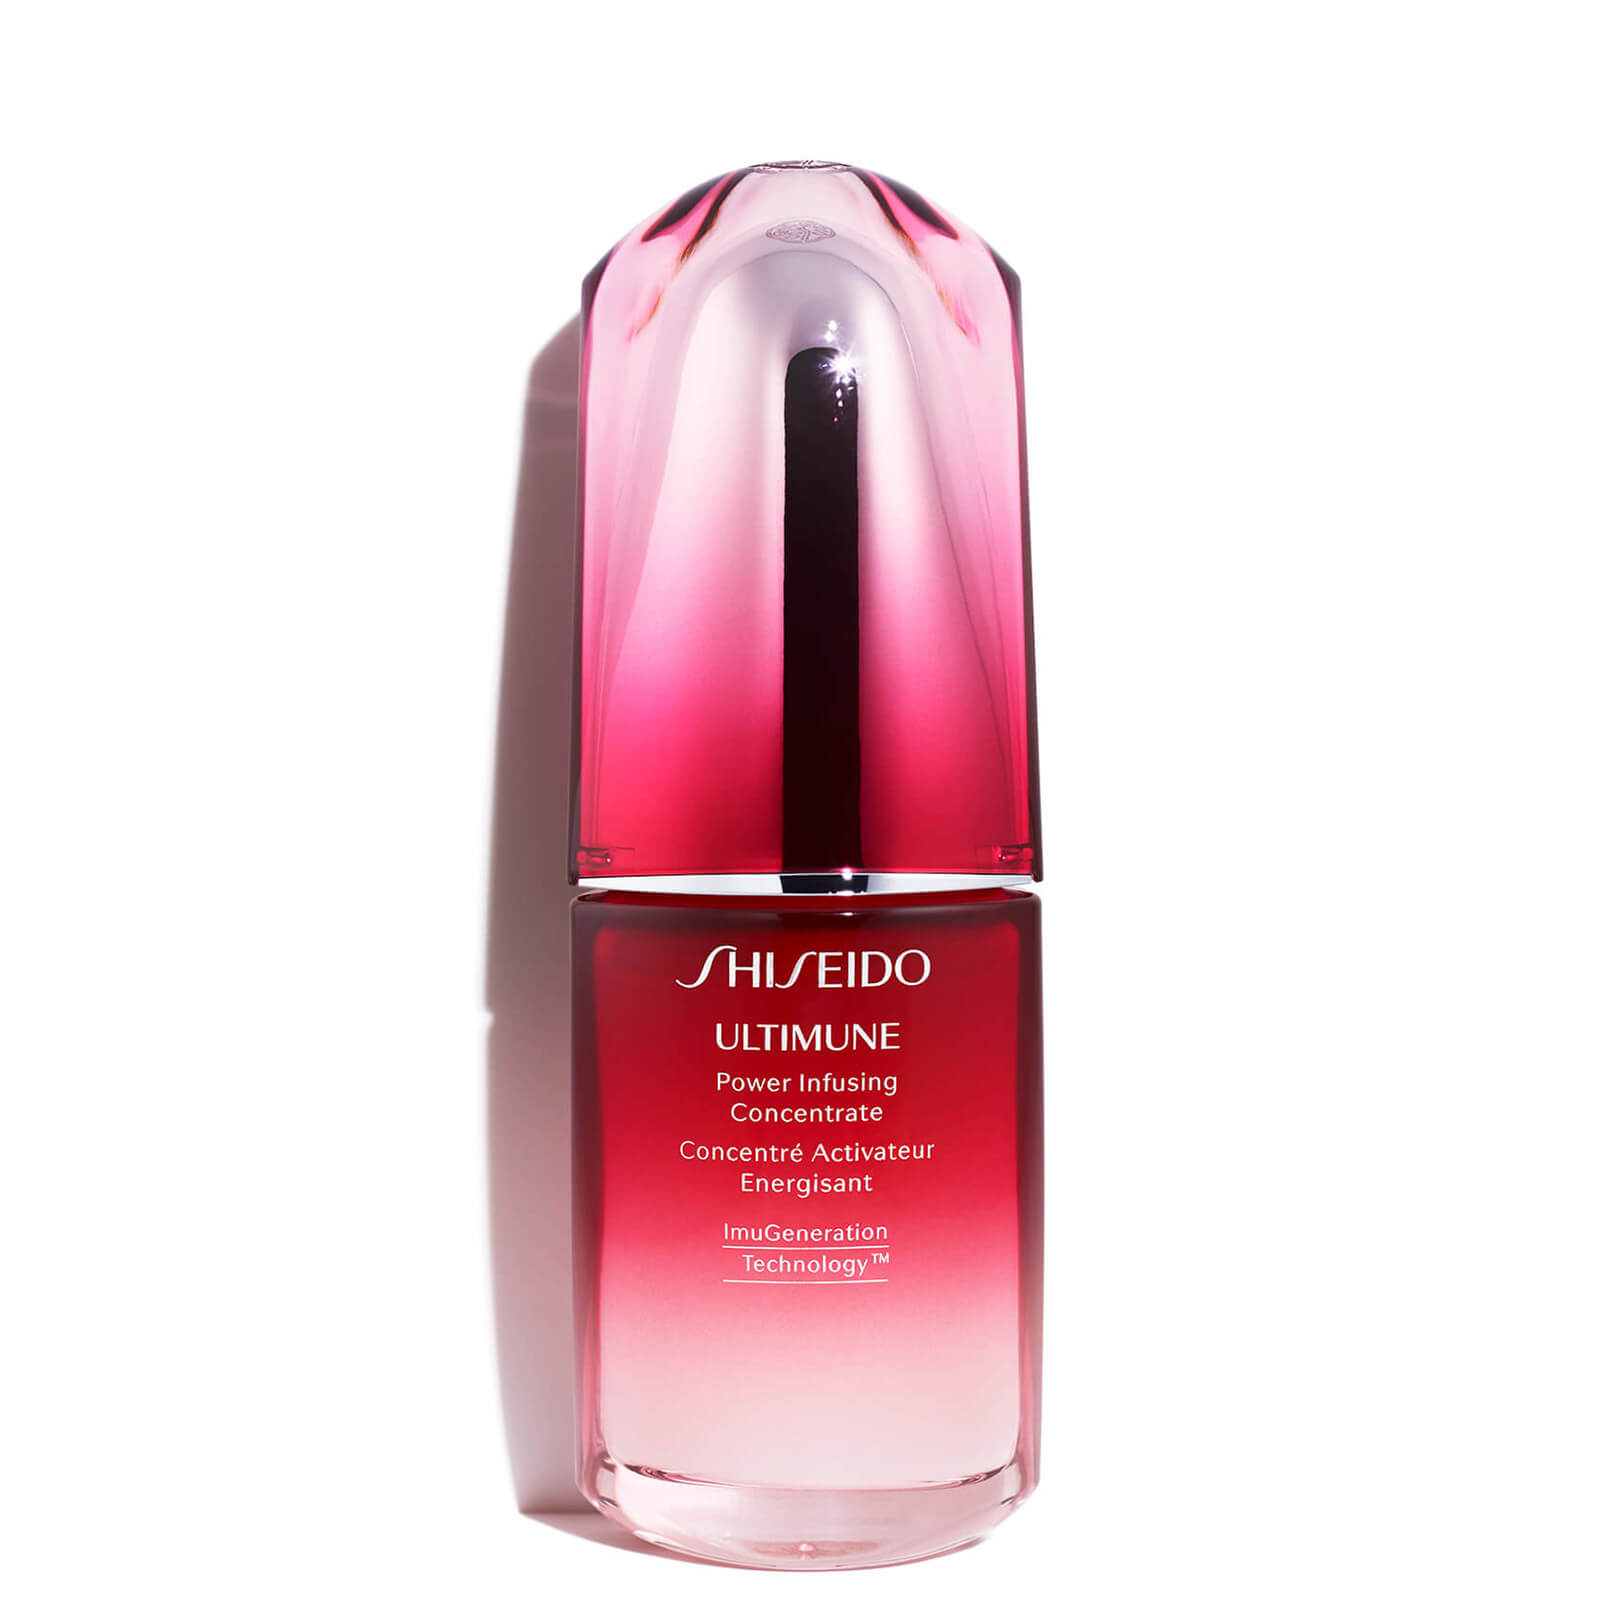 Shiseido Ultimune Power Infusing Concentrate (Various Sizes) – 30ml lookfantastic.com imagine